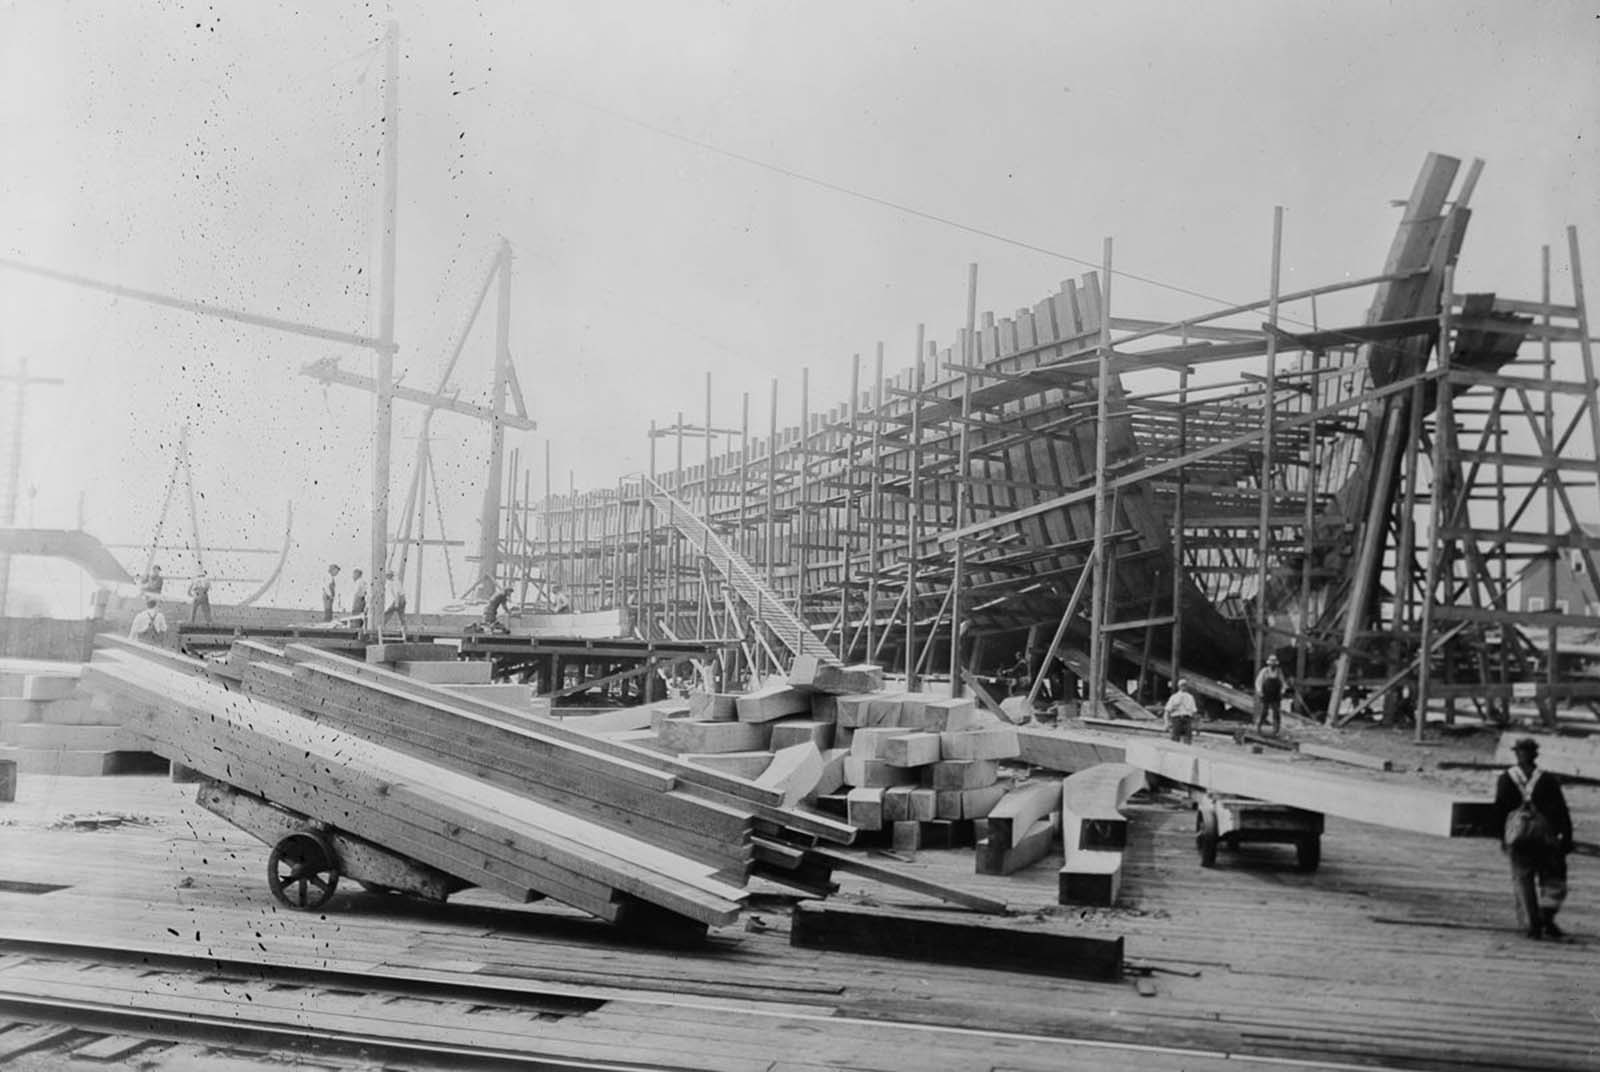 The construction of a wooden ship in Portland, Oregon, 1900.